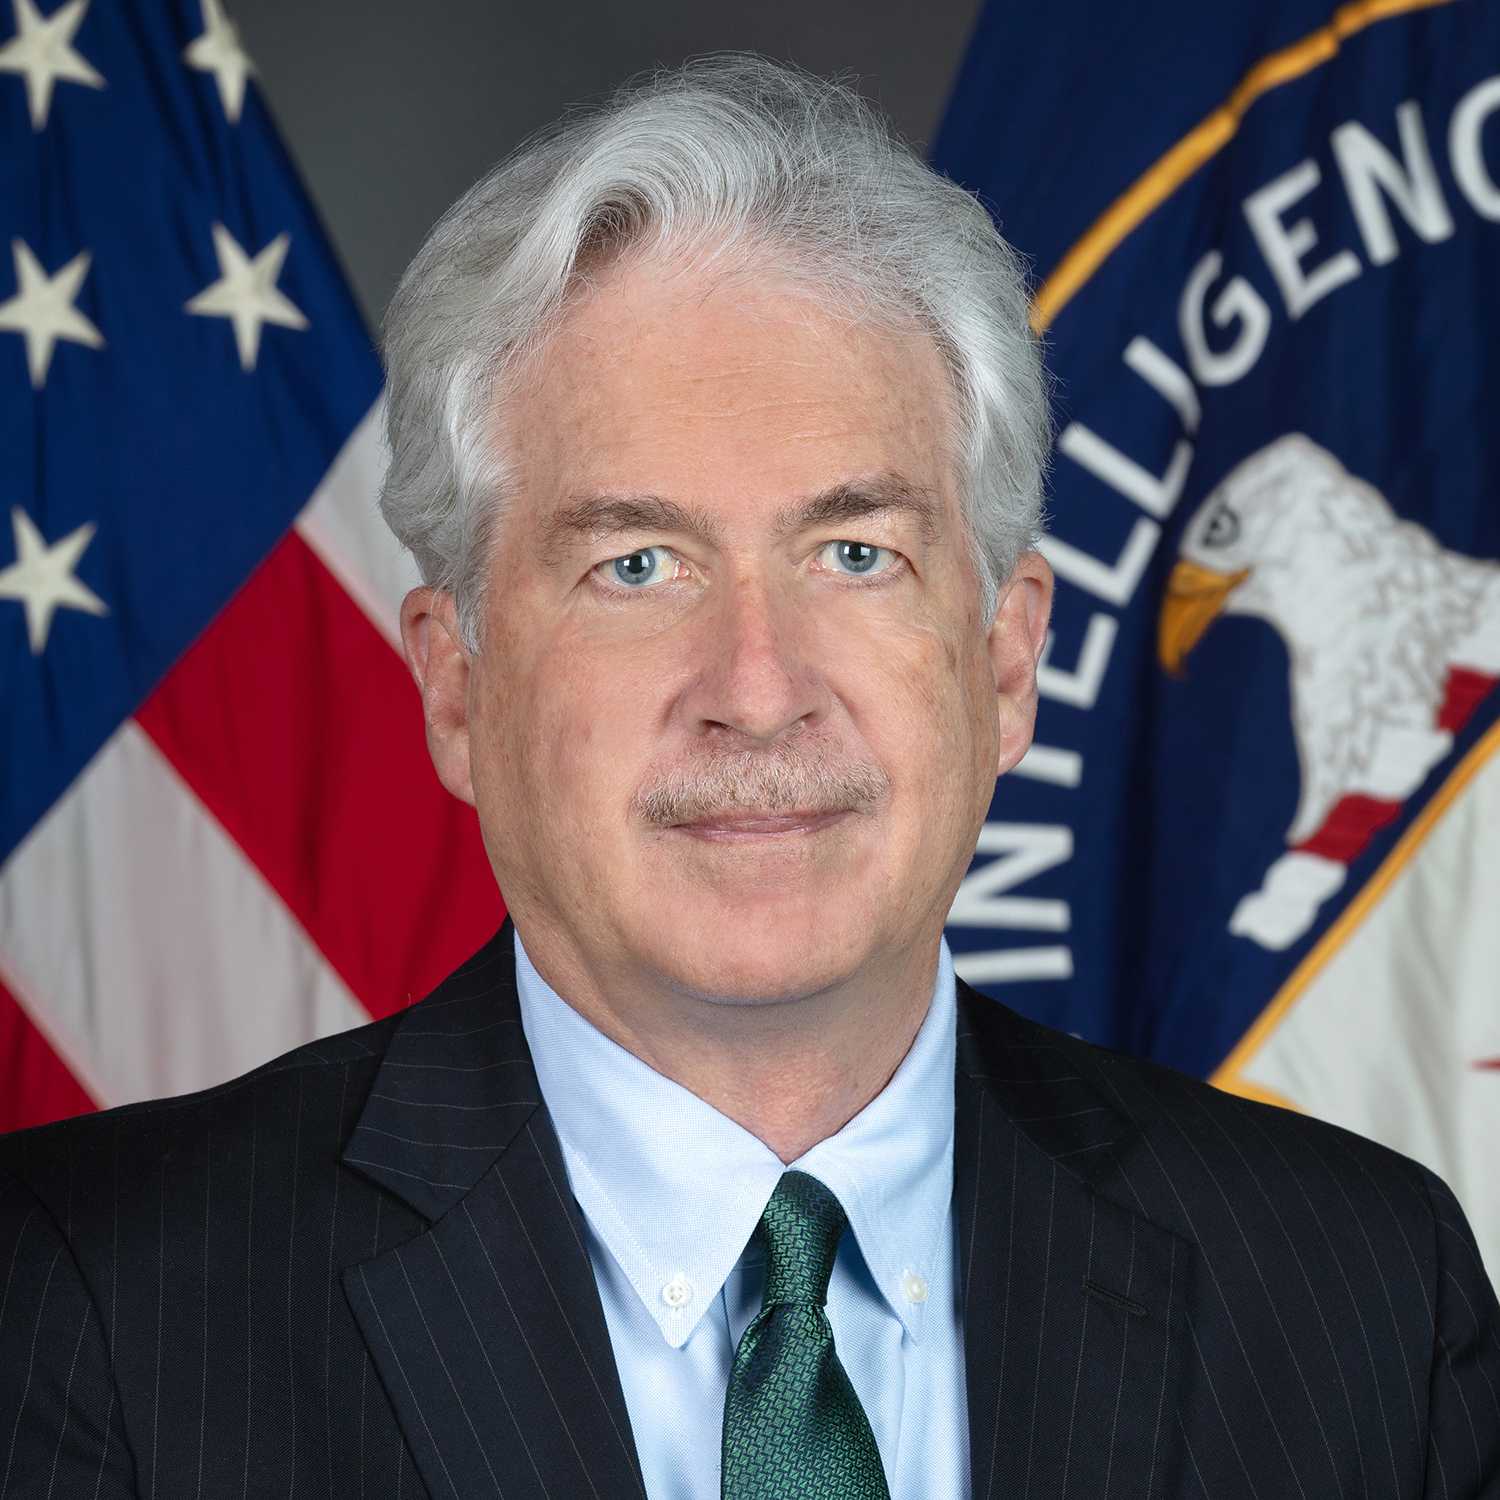 DCIA William Burns portrait with both American and CIA flags in background.